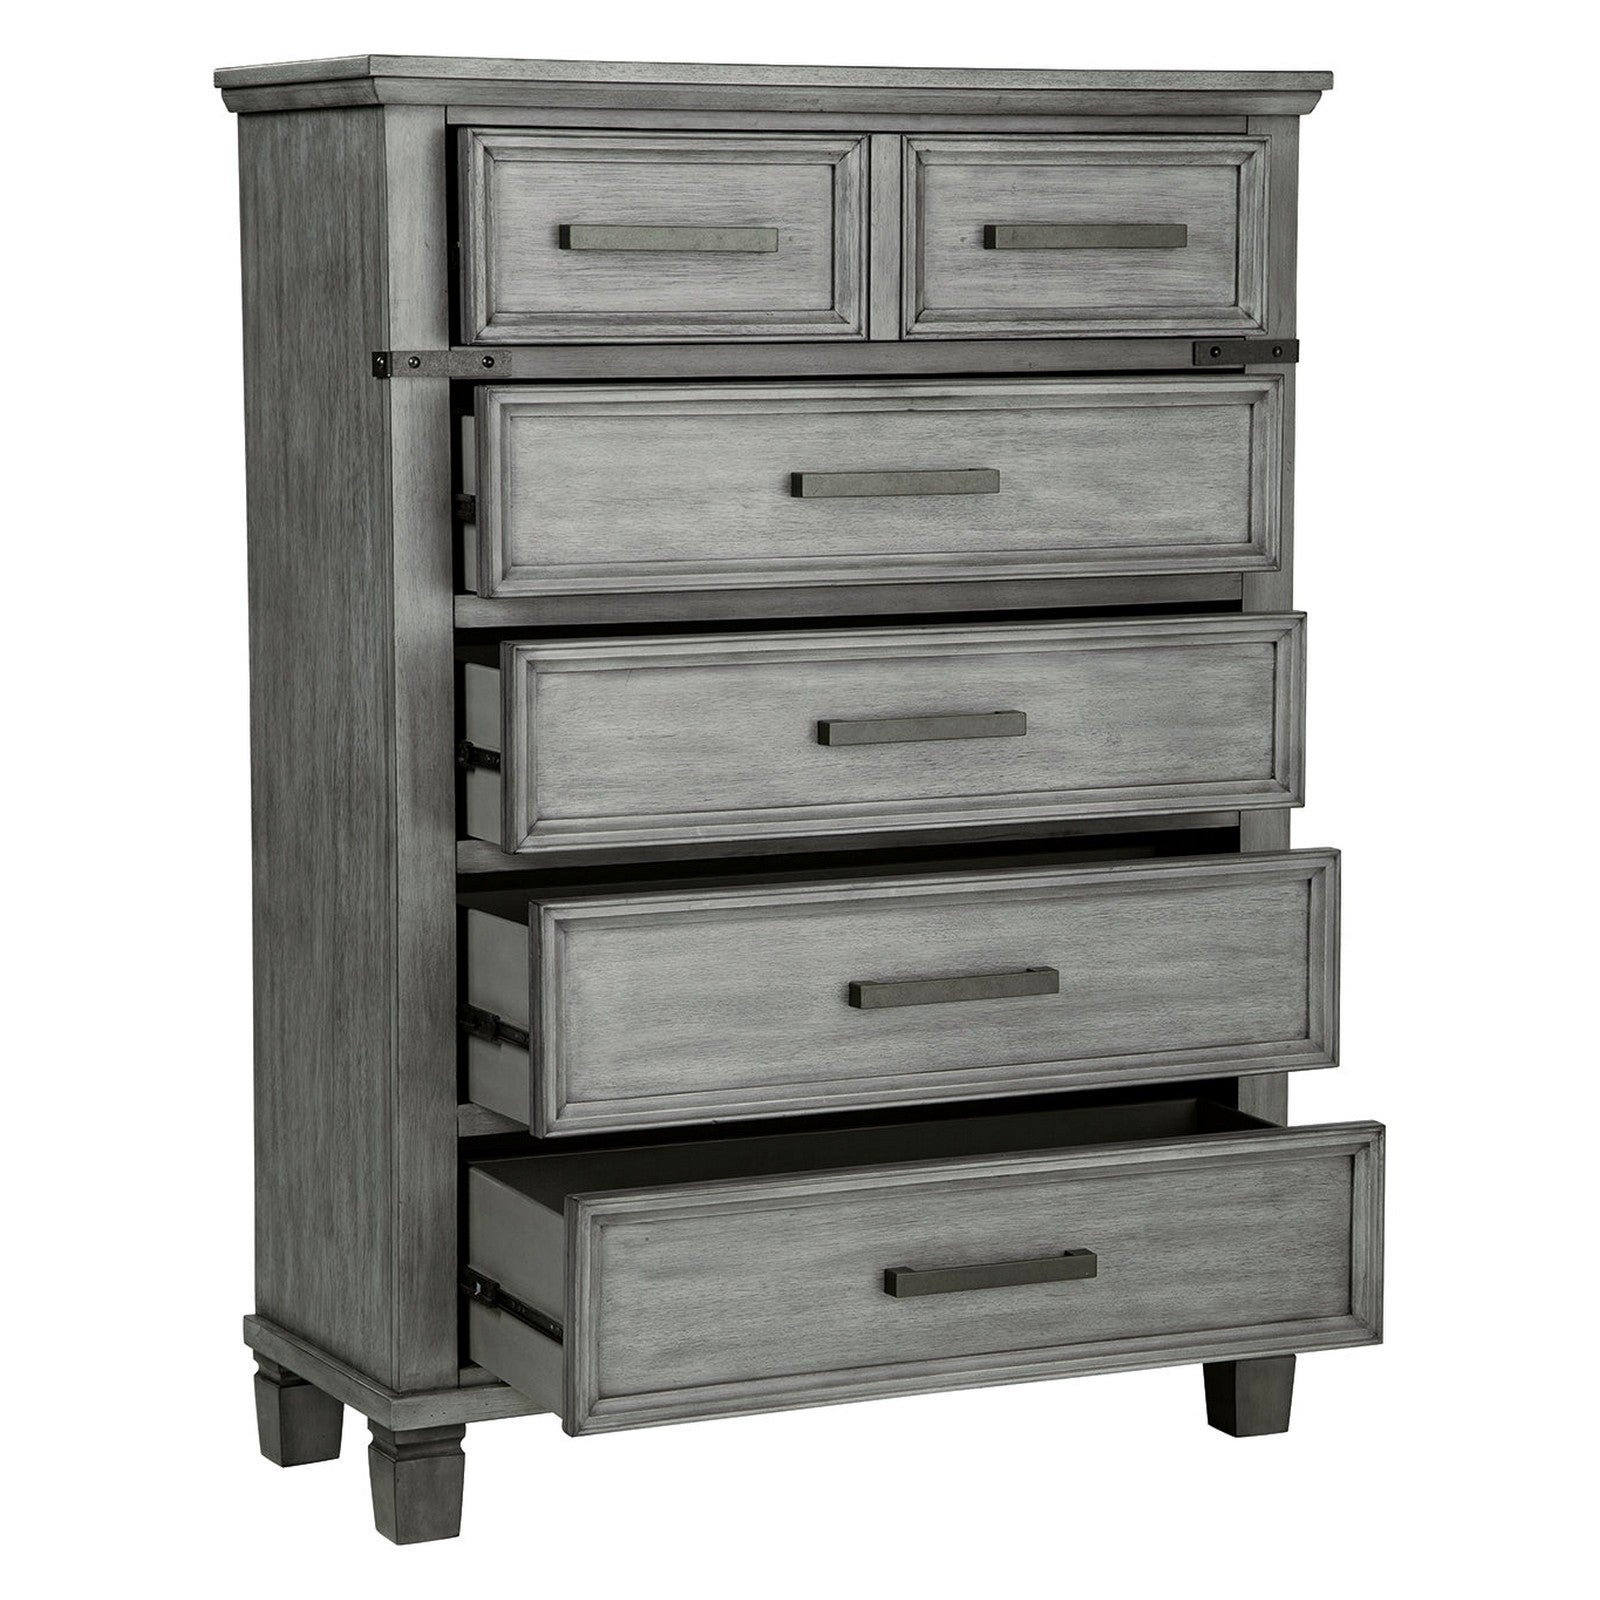 Russelyn Chest of Drawers Ash-B772-46